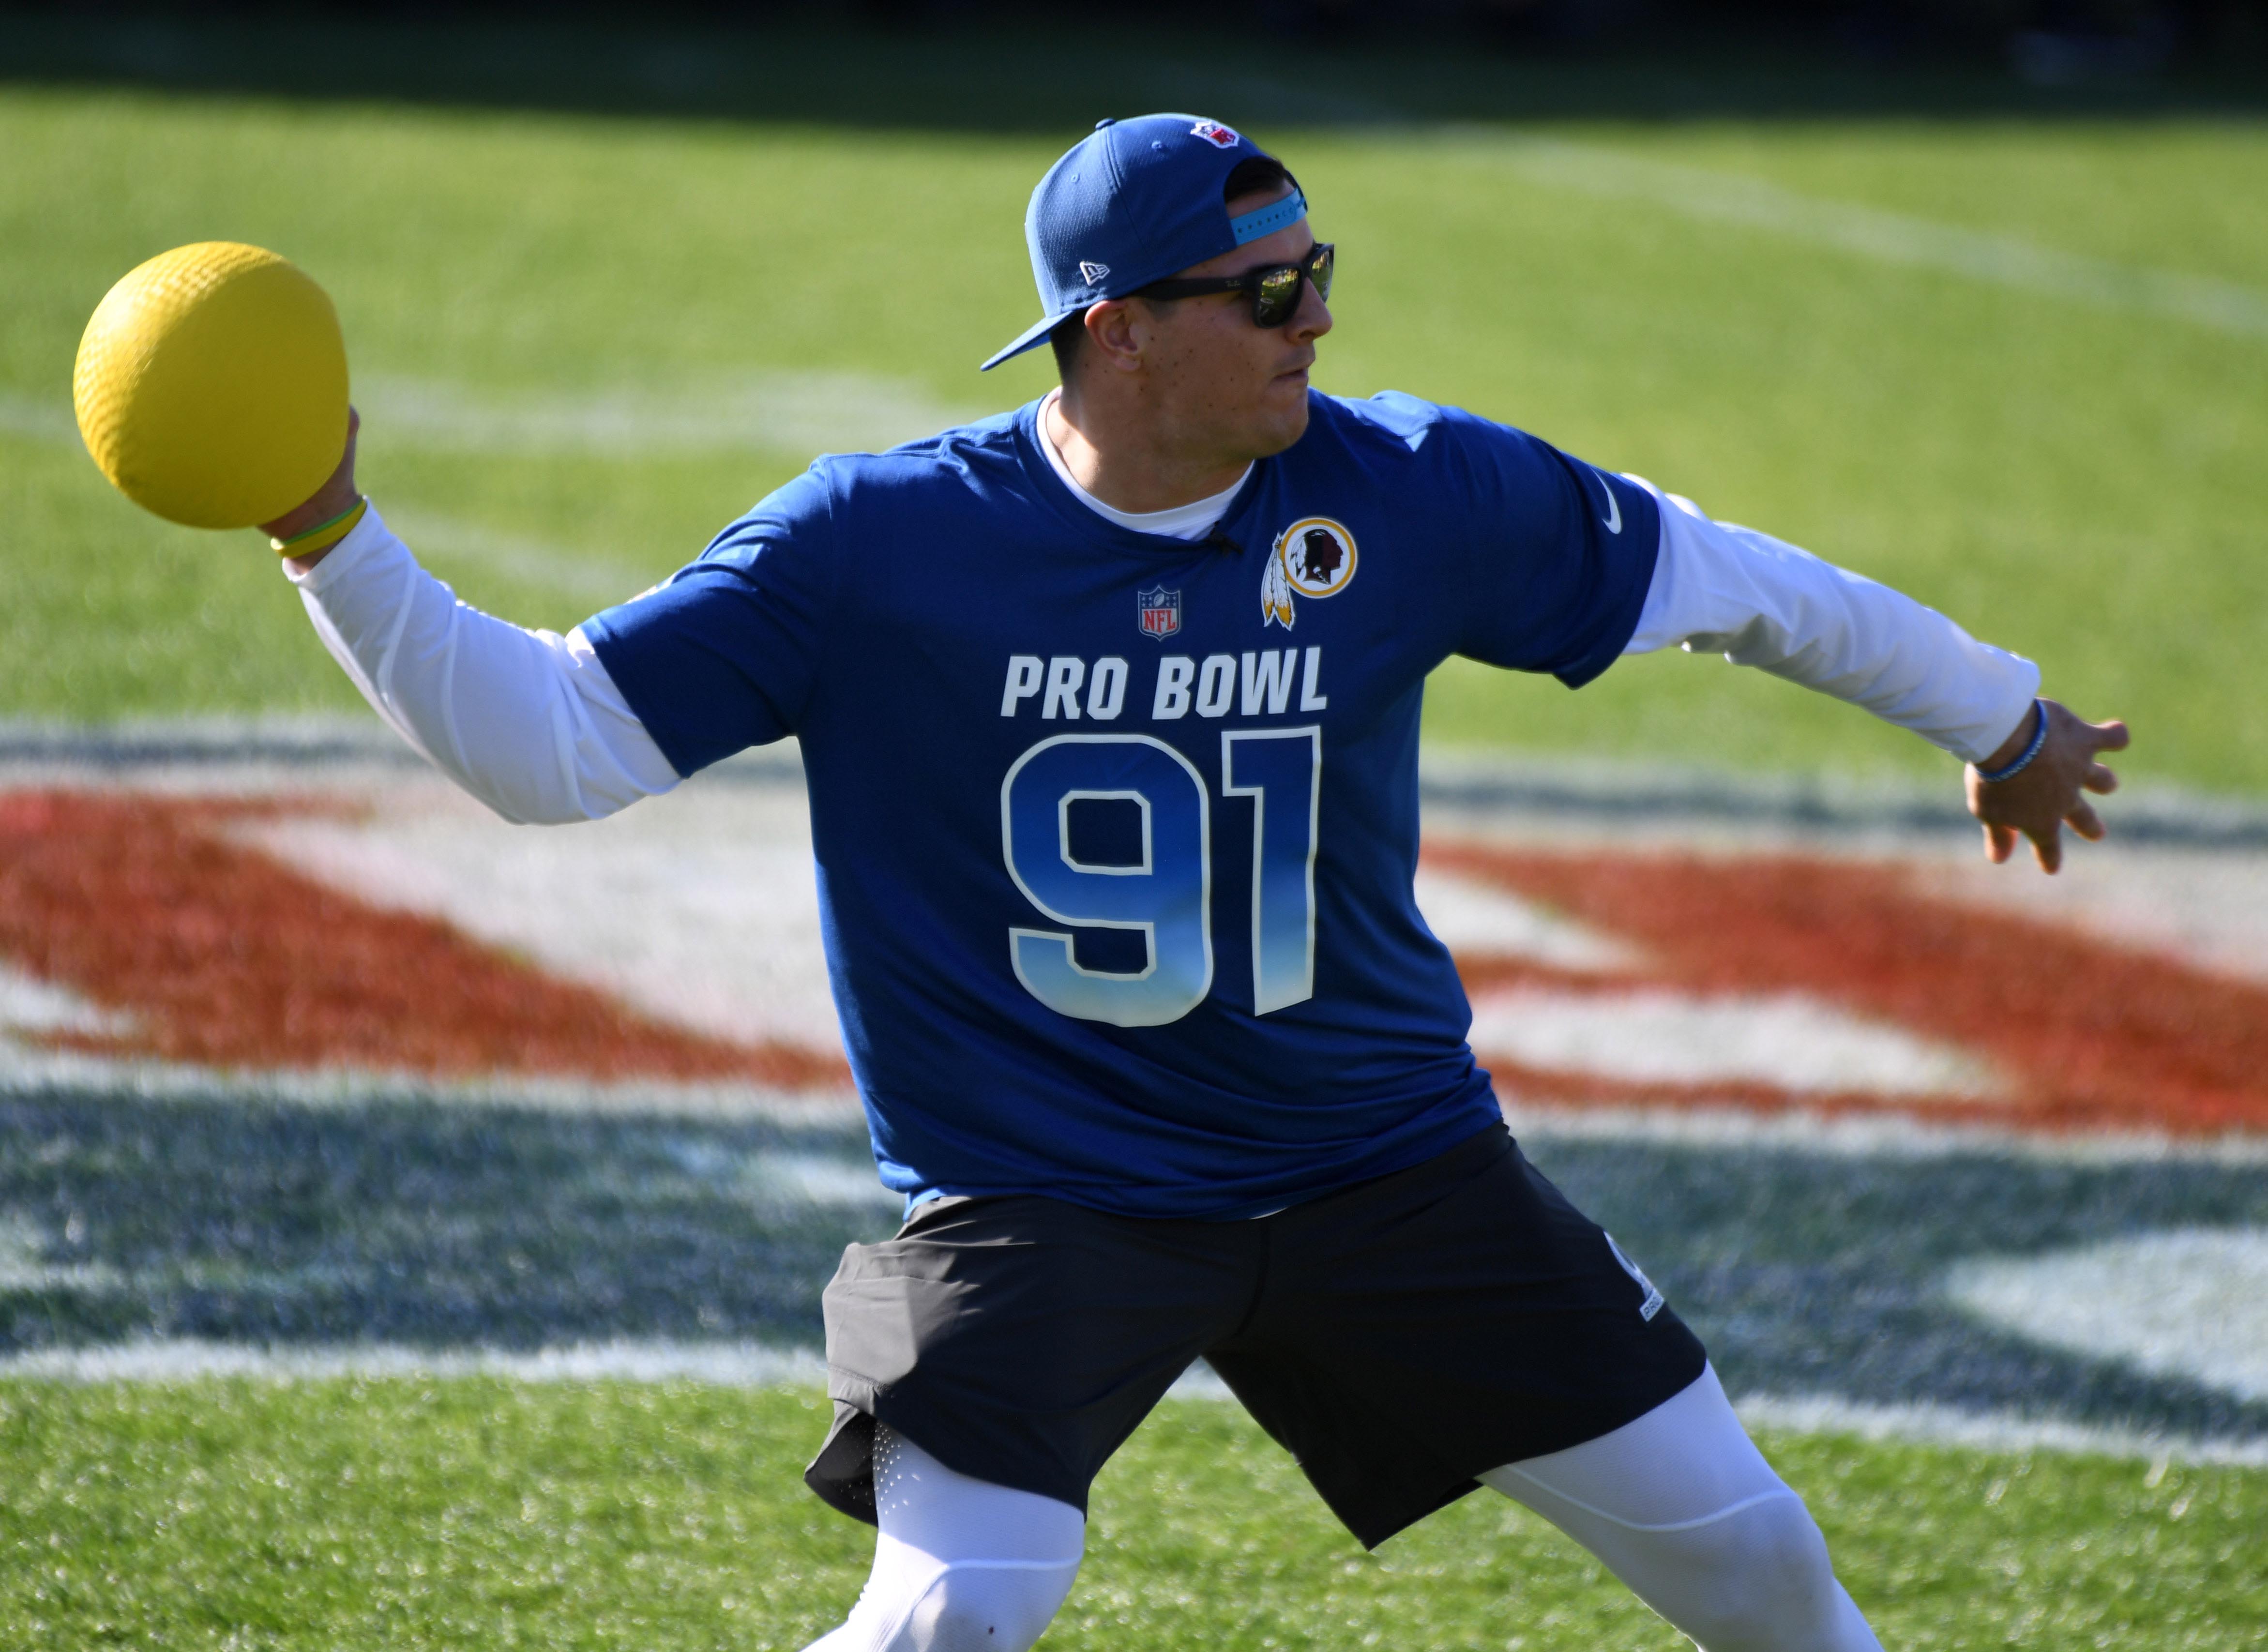 Redskins linebacker Ryan Kerrigan (91) throws the ball in the epic dodgeball competition at the Pro Bowl Skills Showdown at ESPN Wide World of Sports